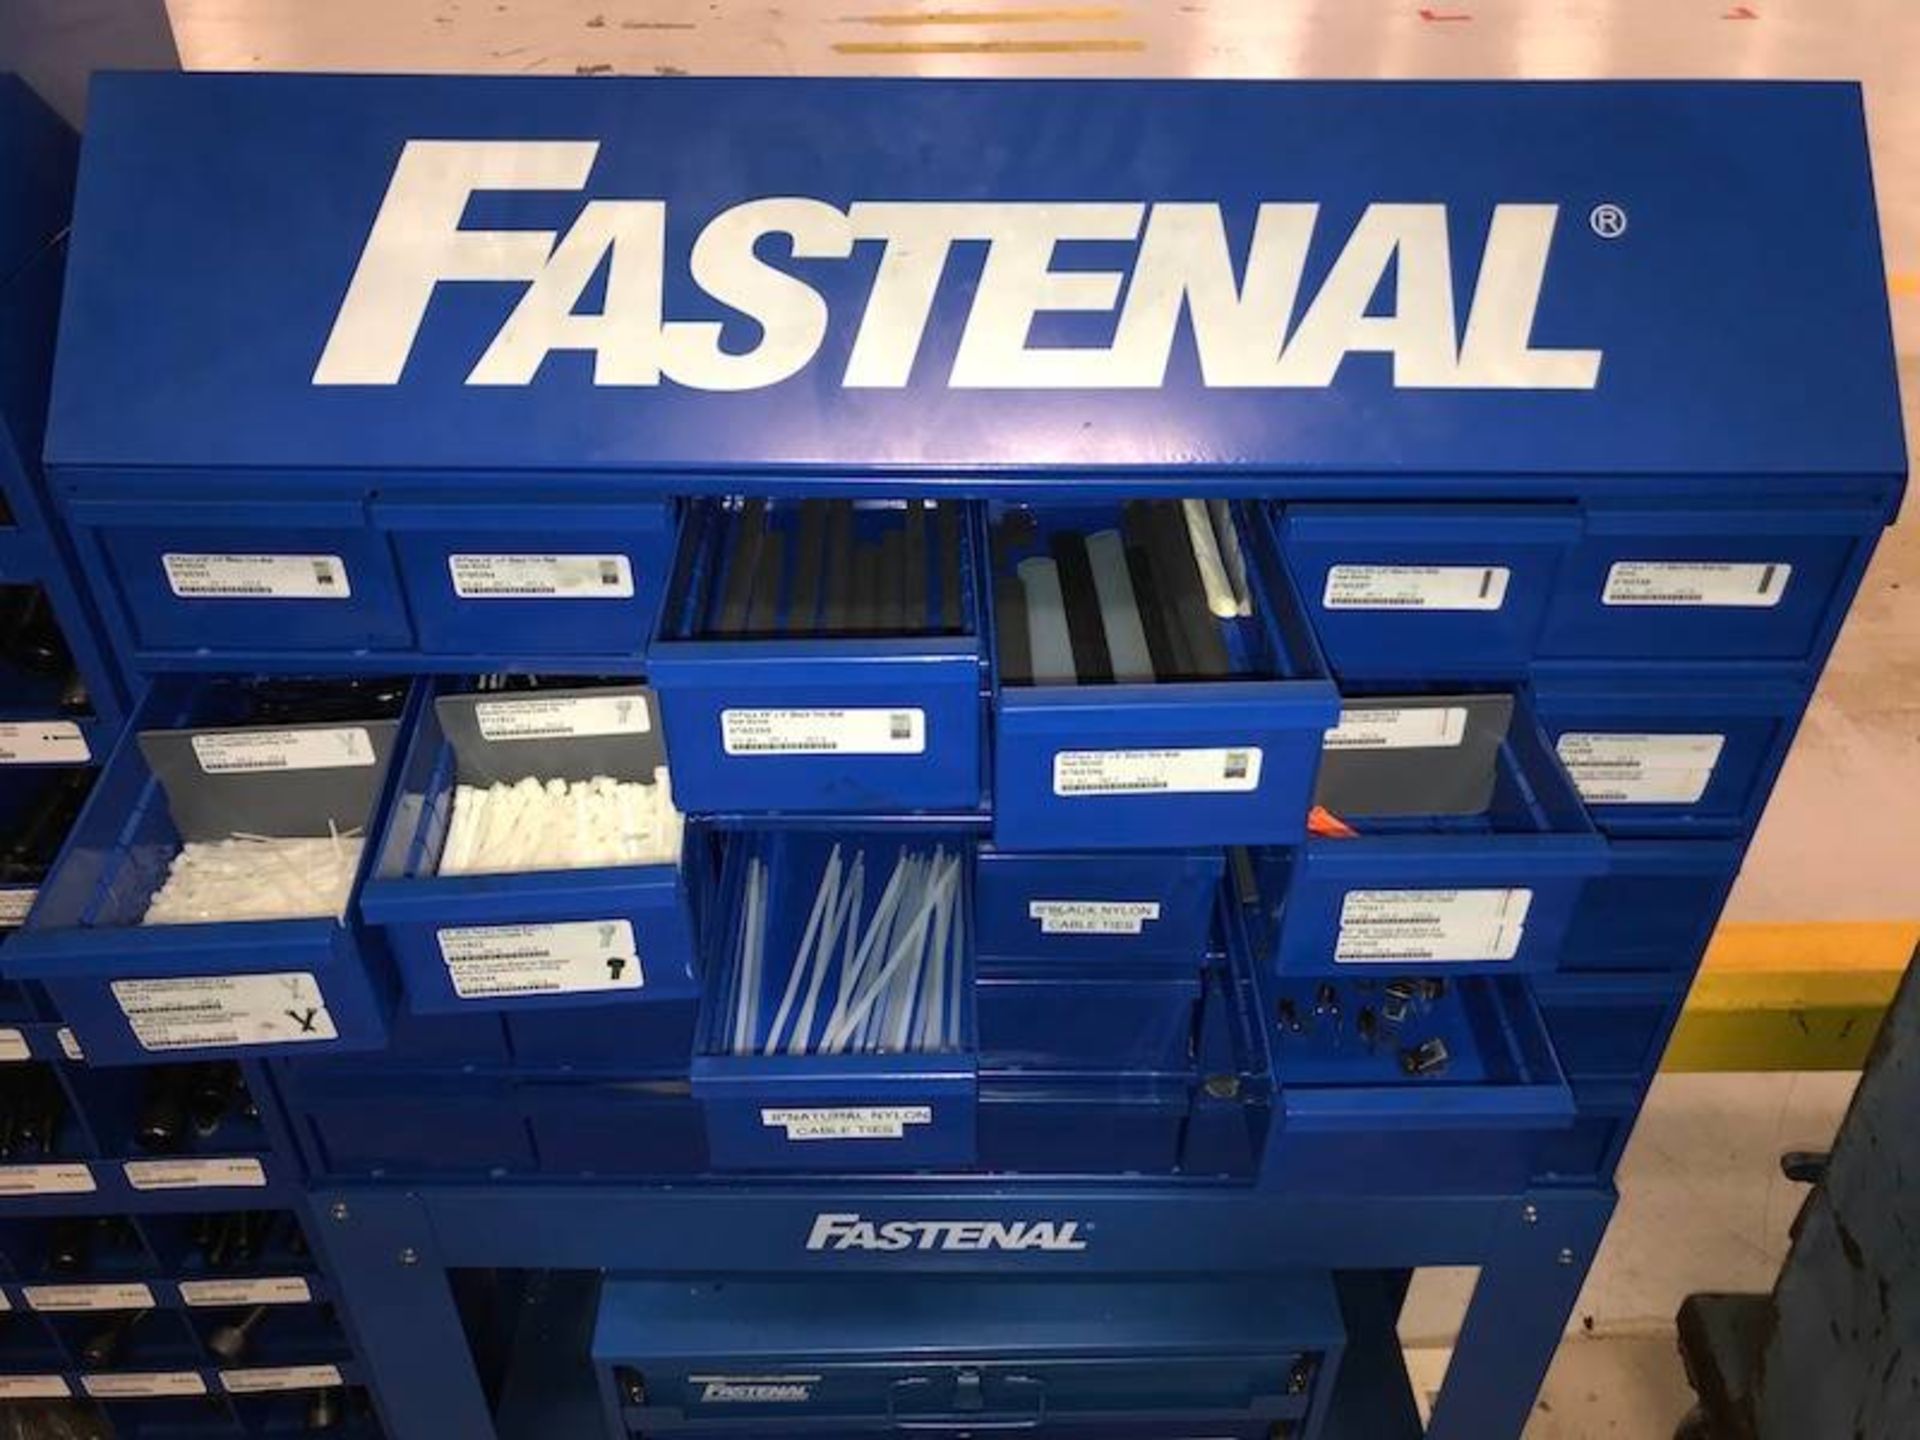 Contents of Fastenal Parts Bins - Image 69 of 70